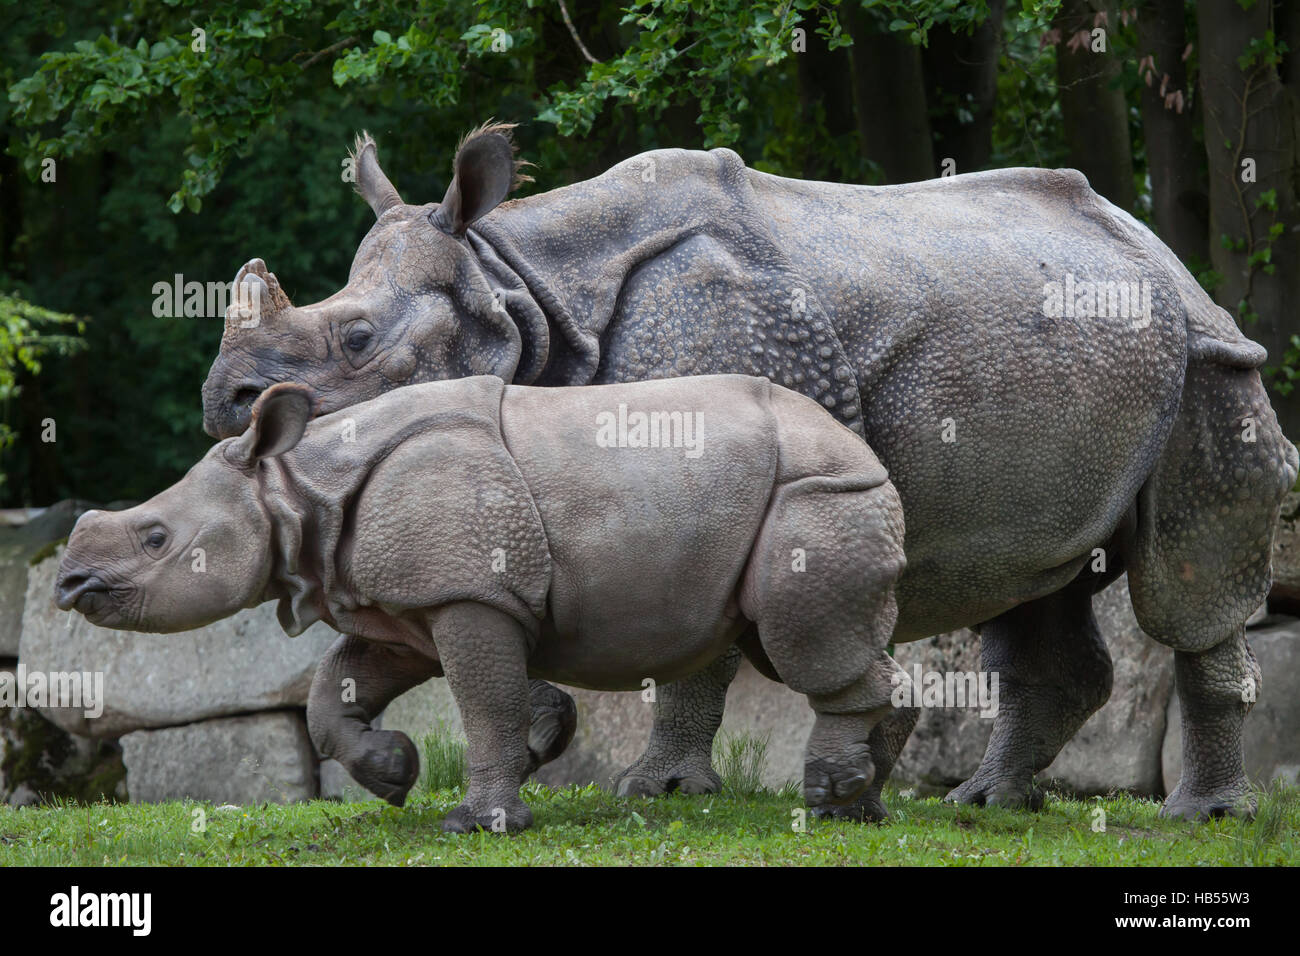 Nine-month-old Indian rhinoceros (Rhinoceros unicornis) called Puri with its mother Rapti at Hellabrunn Zoo in Munich, Bavaria, Germany. The baby rhin Stock Photo